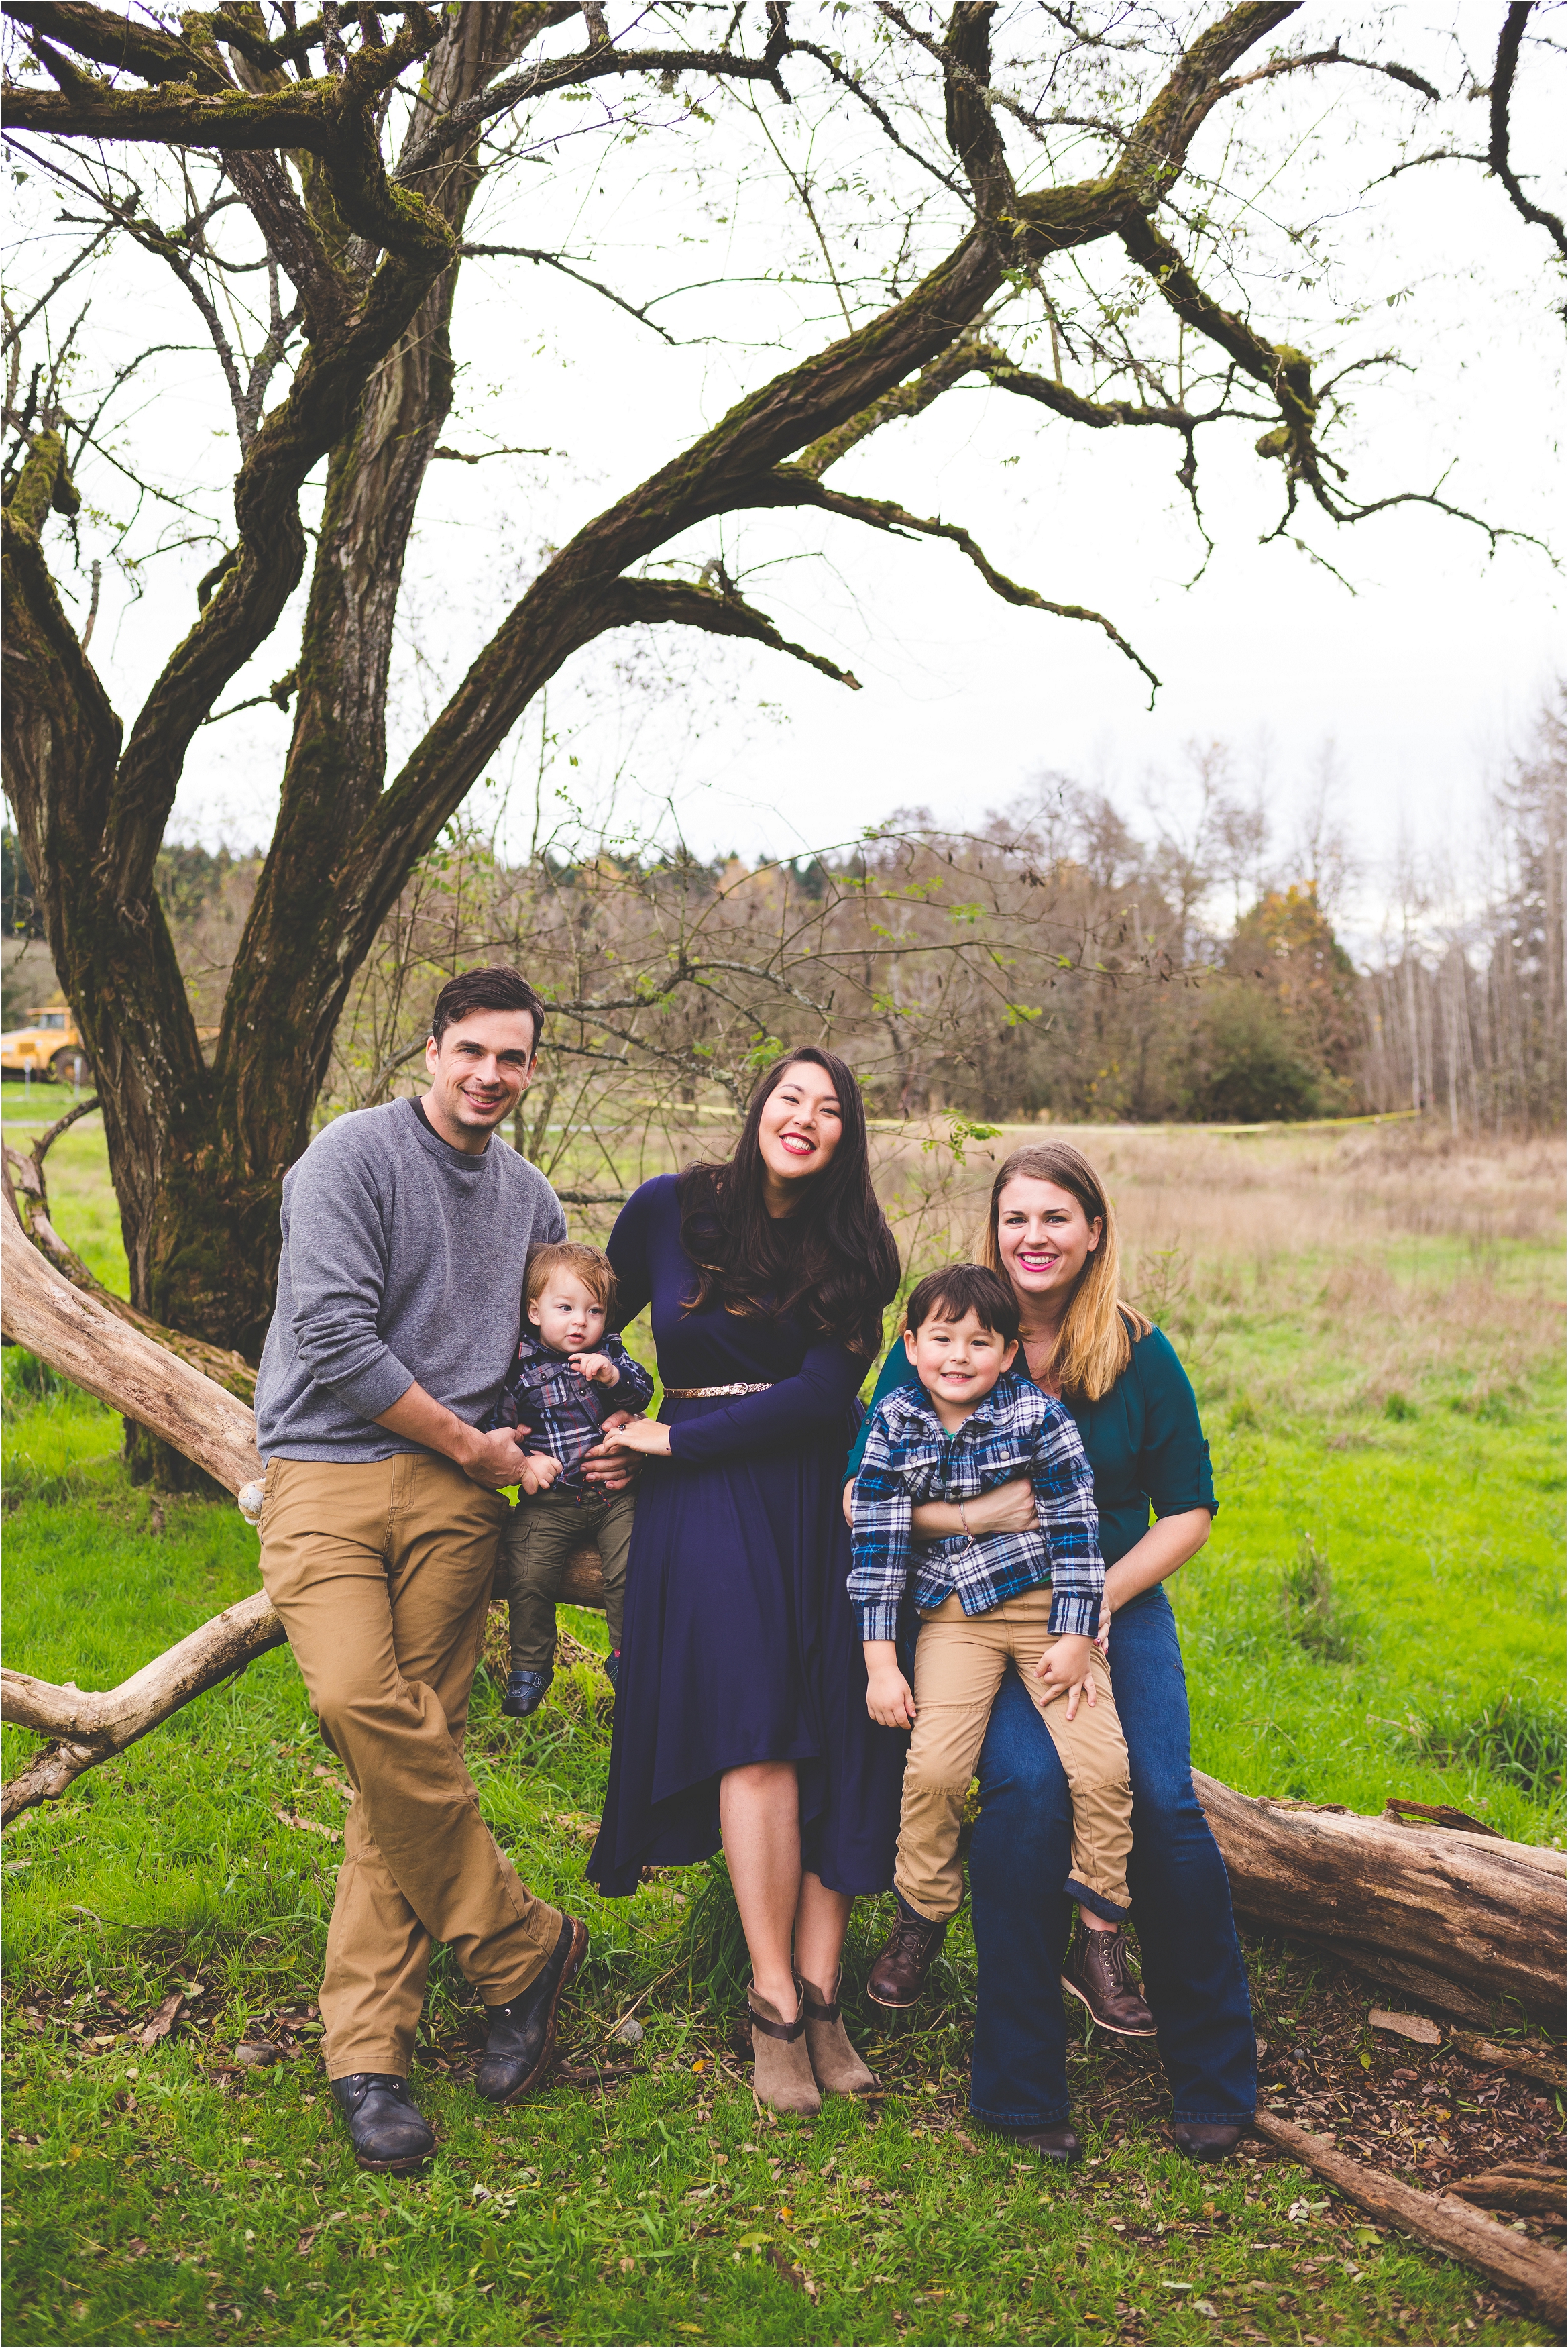 fort-steilacoom-park-family-session-jannicka-mayte-pacific-northwest-lifestyle-photographer_0033.jpg